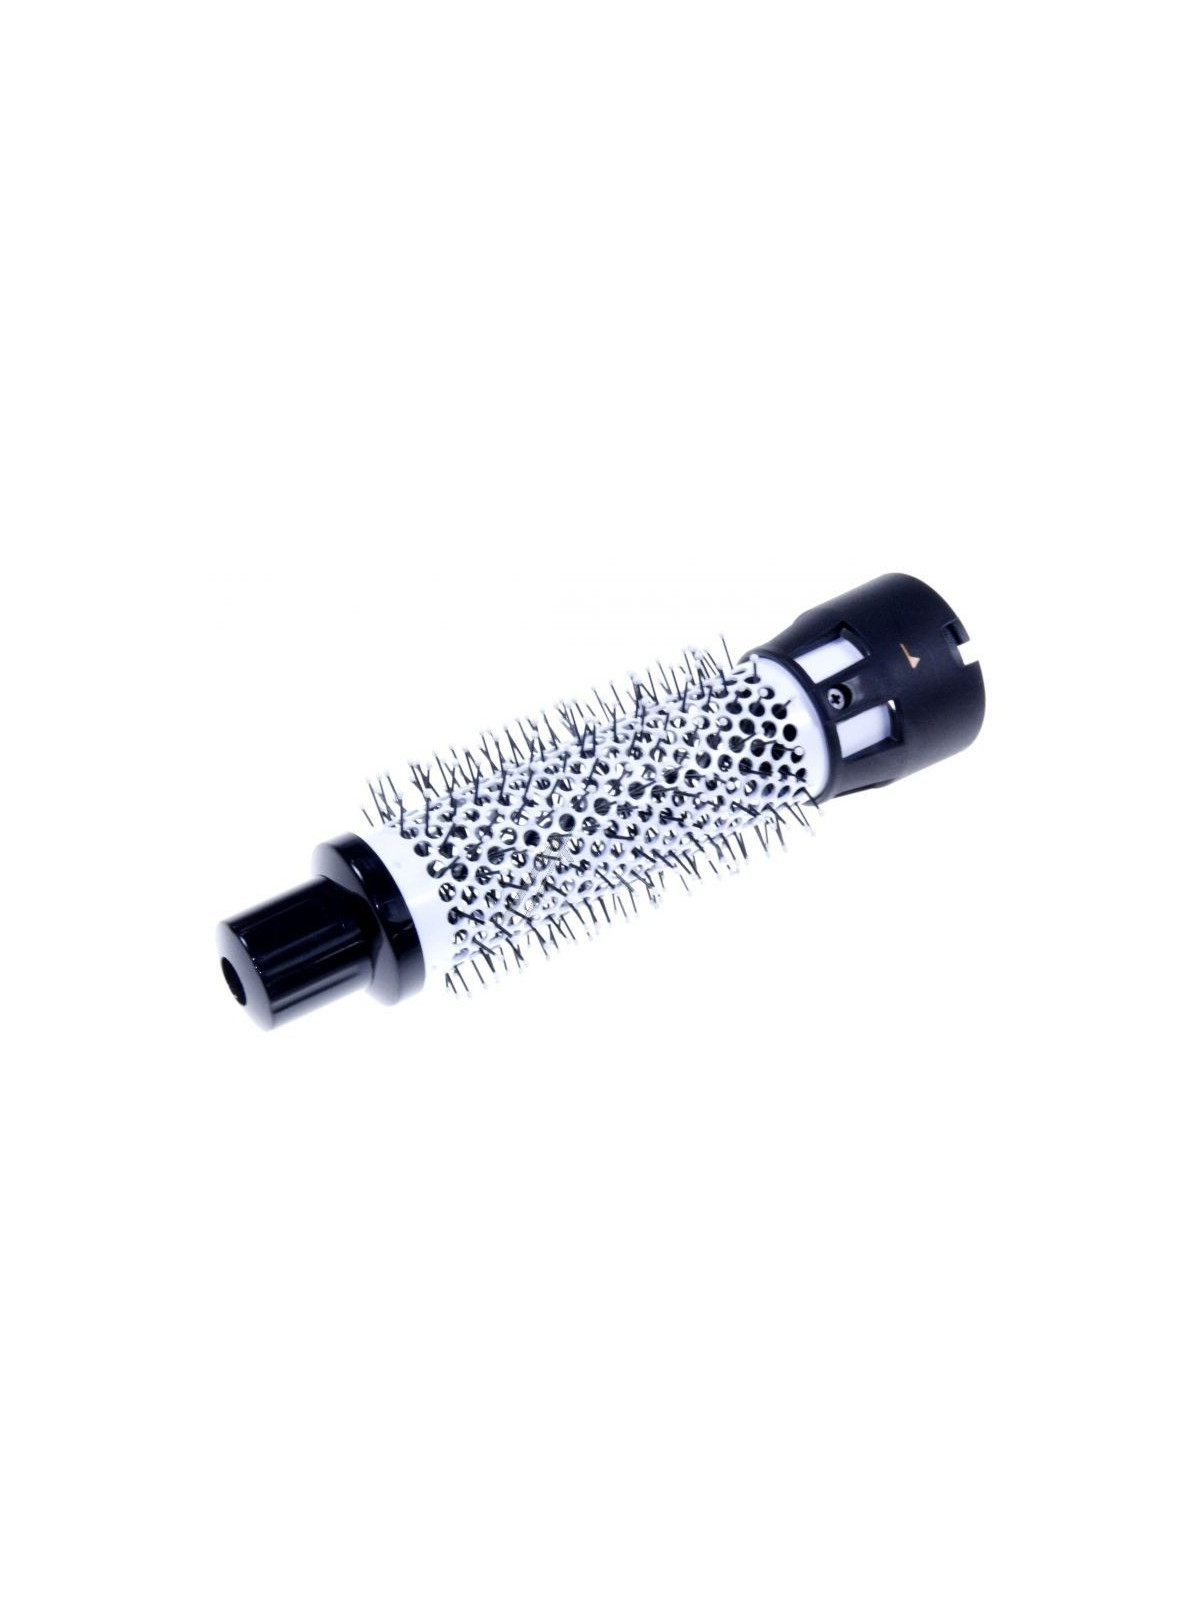 Brosse thermique 32mm Babyliss 2701CE / 2701E - Brosse